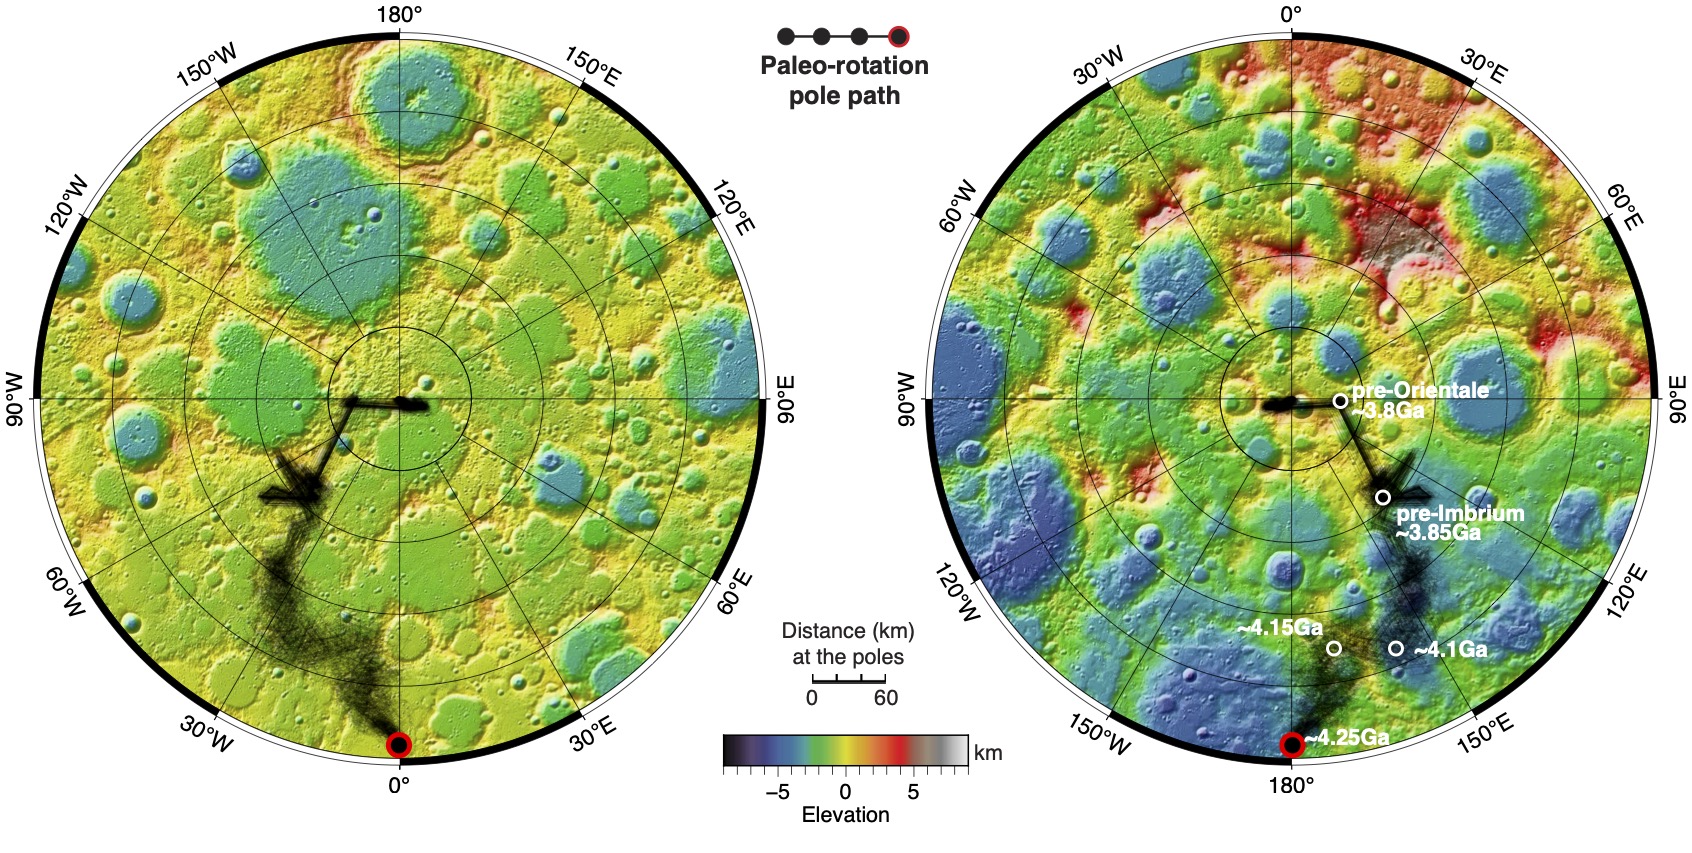 Two circles, each with many round blobs ranging from blue through green, yellow, and red, based on elevation of the crater. Each circle has a black line traveling from the edge (the pole location 4.25B years ago) to the center (present-day pole).